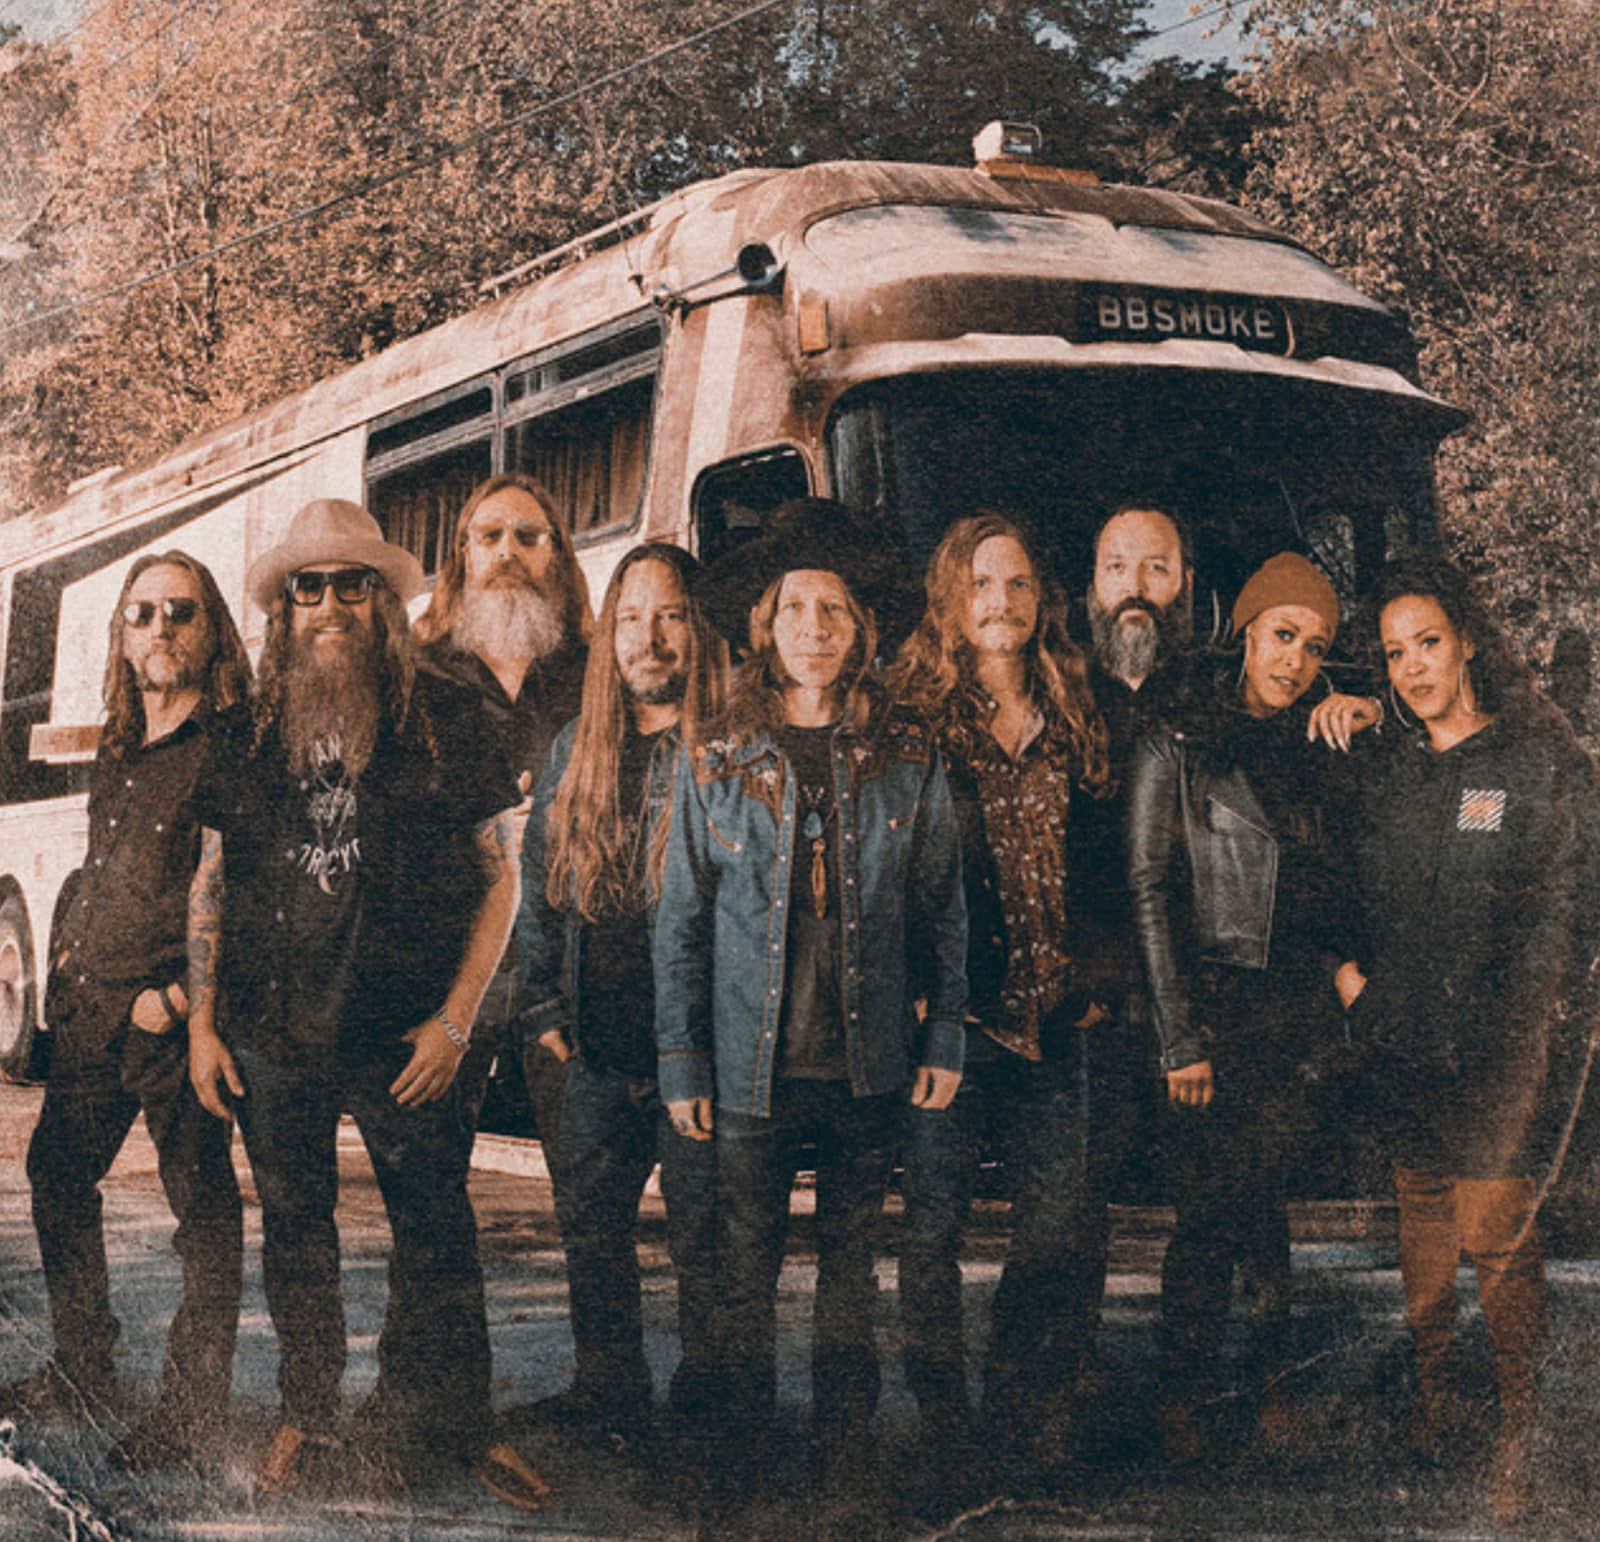 Blackberry Smoke at Columbiahalle Tickets